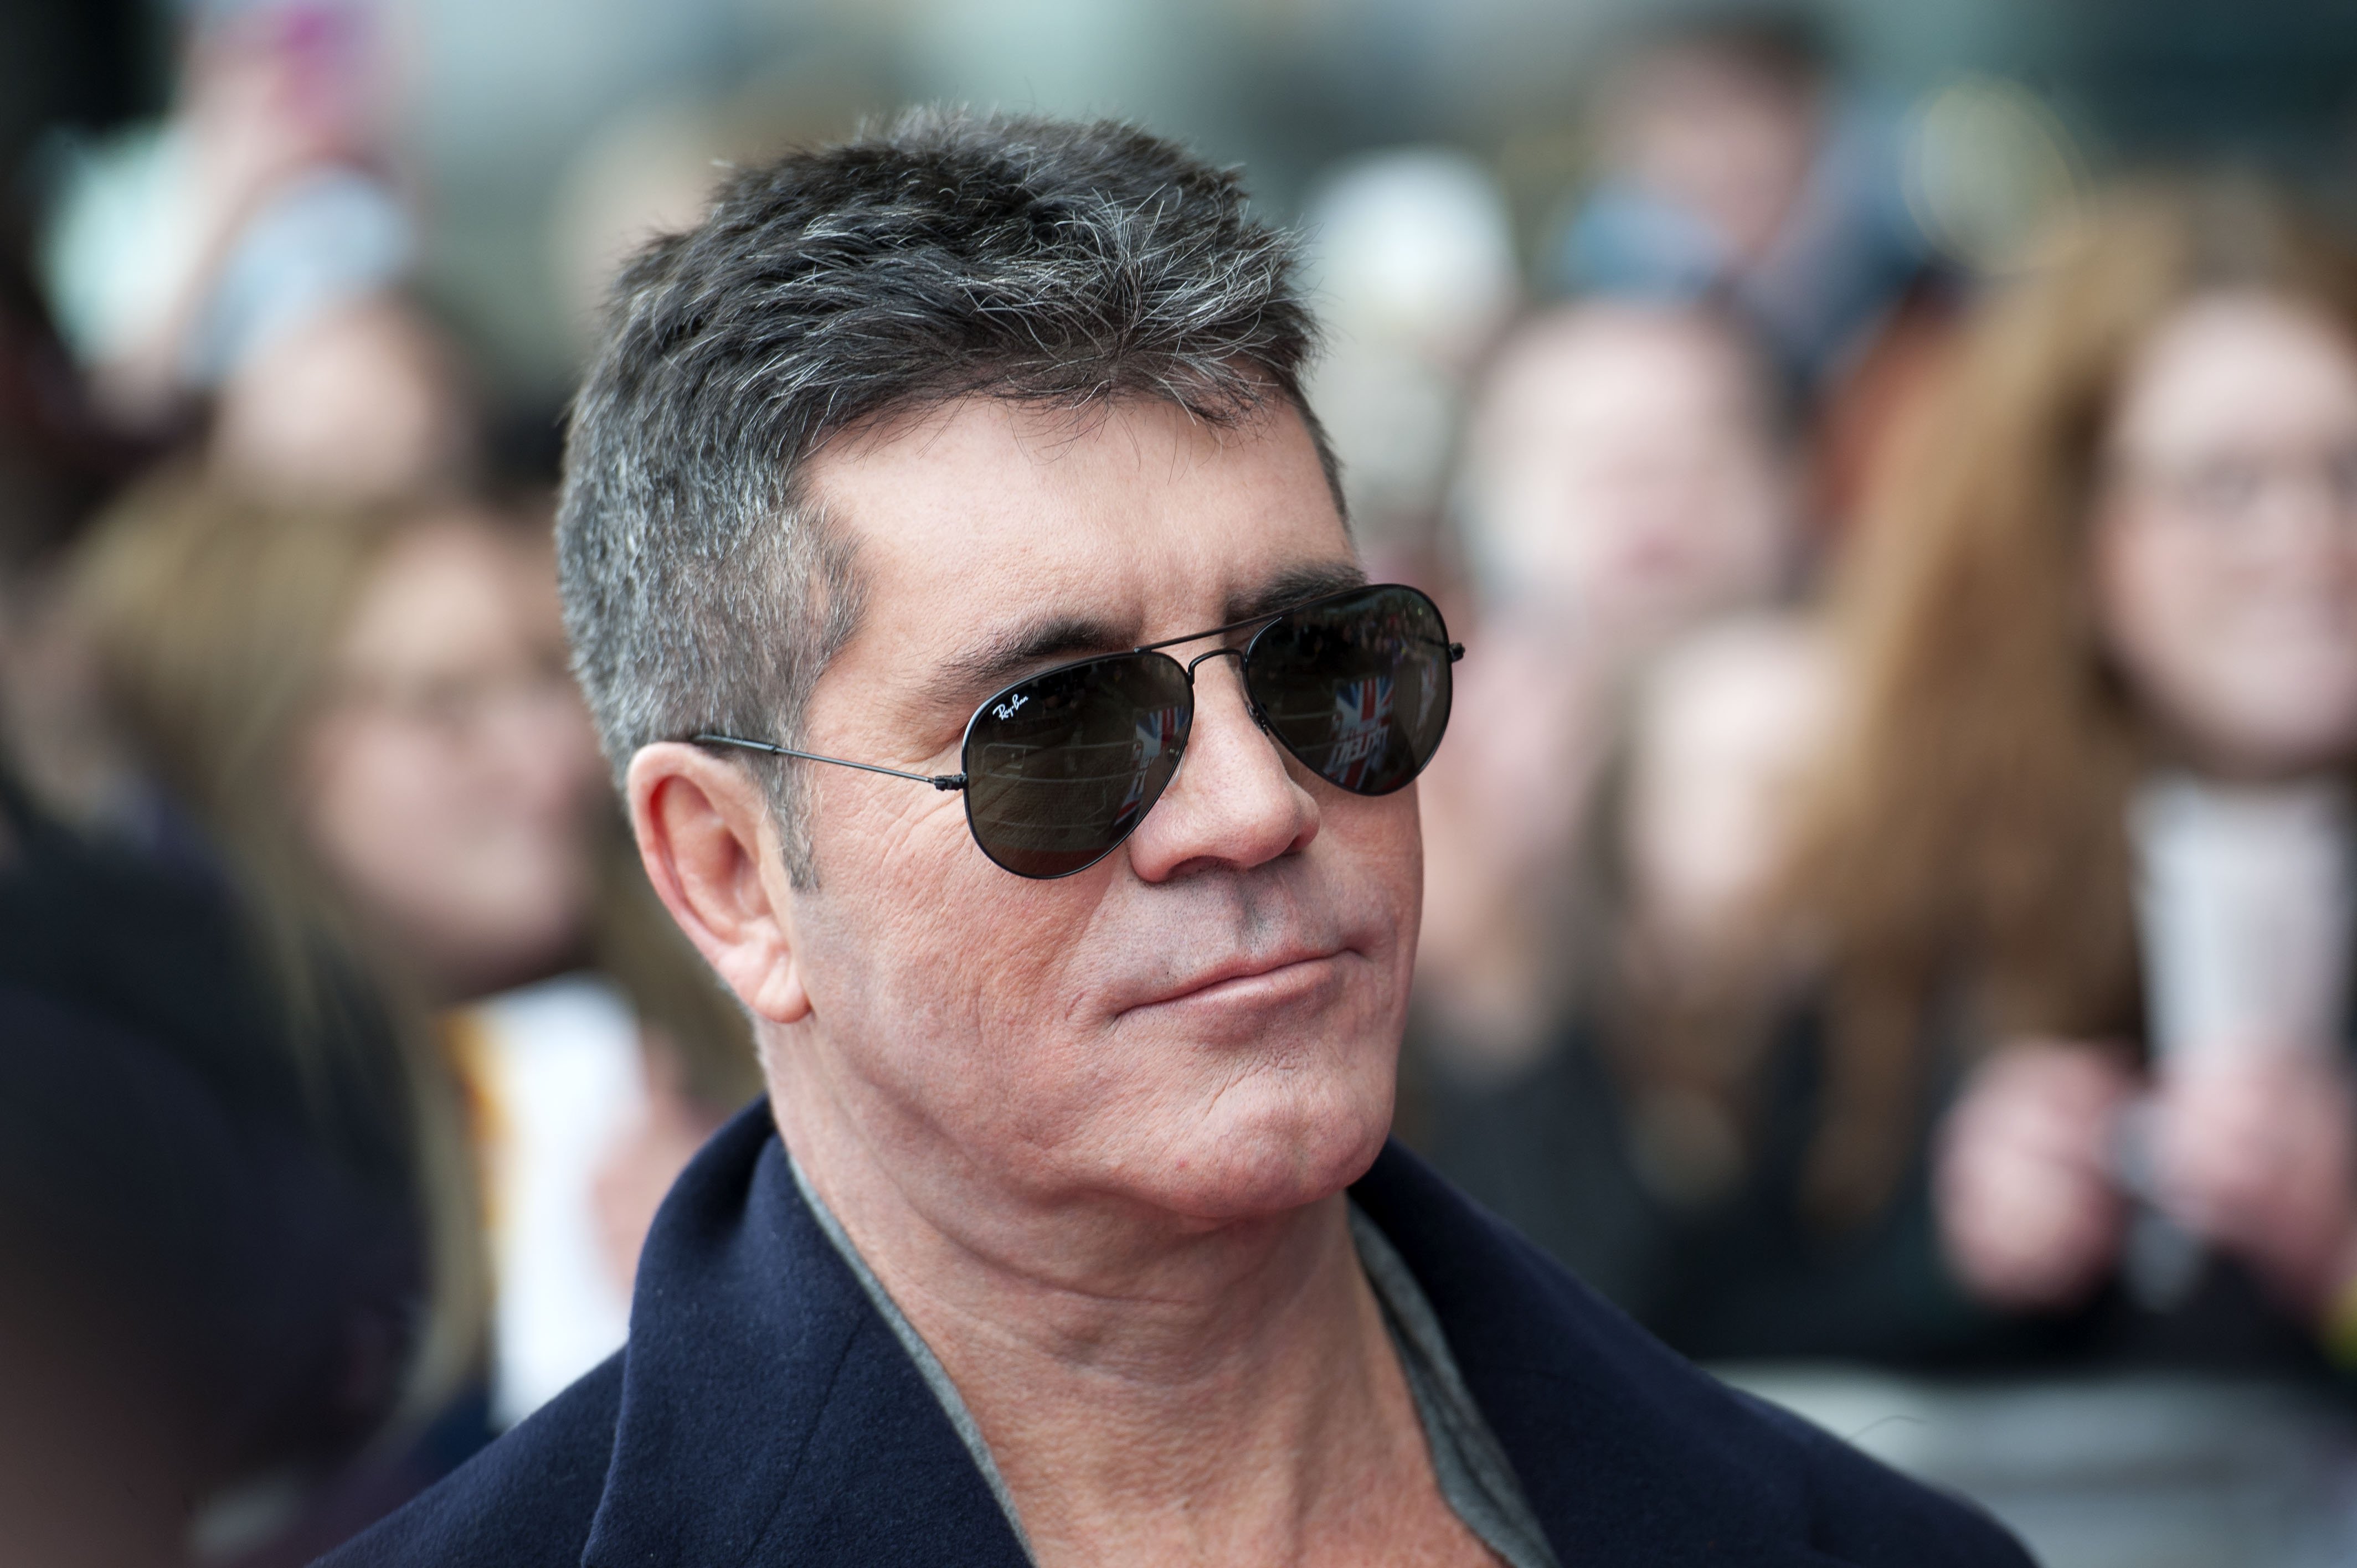 Simon Cowell arrives at the Britain's Got Talent Cardiff auditions | Source: Getty Images